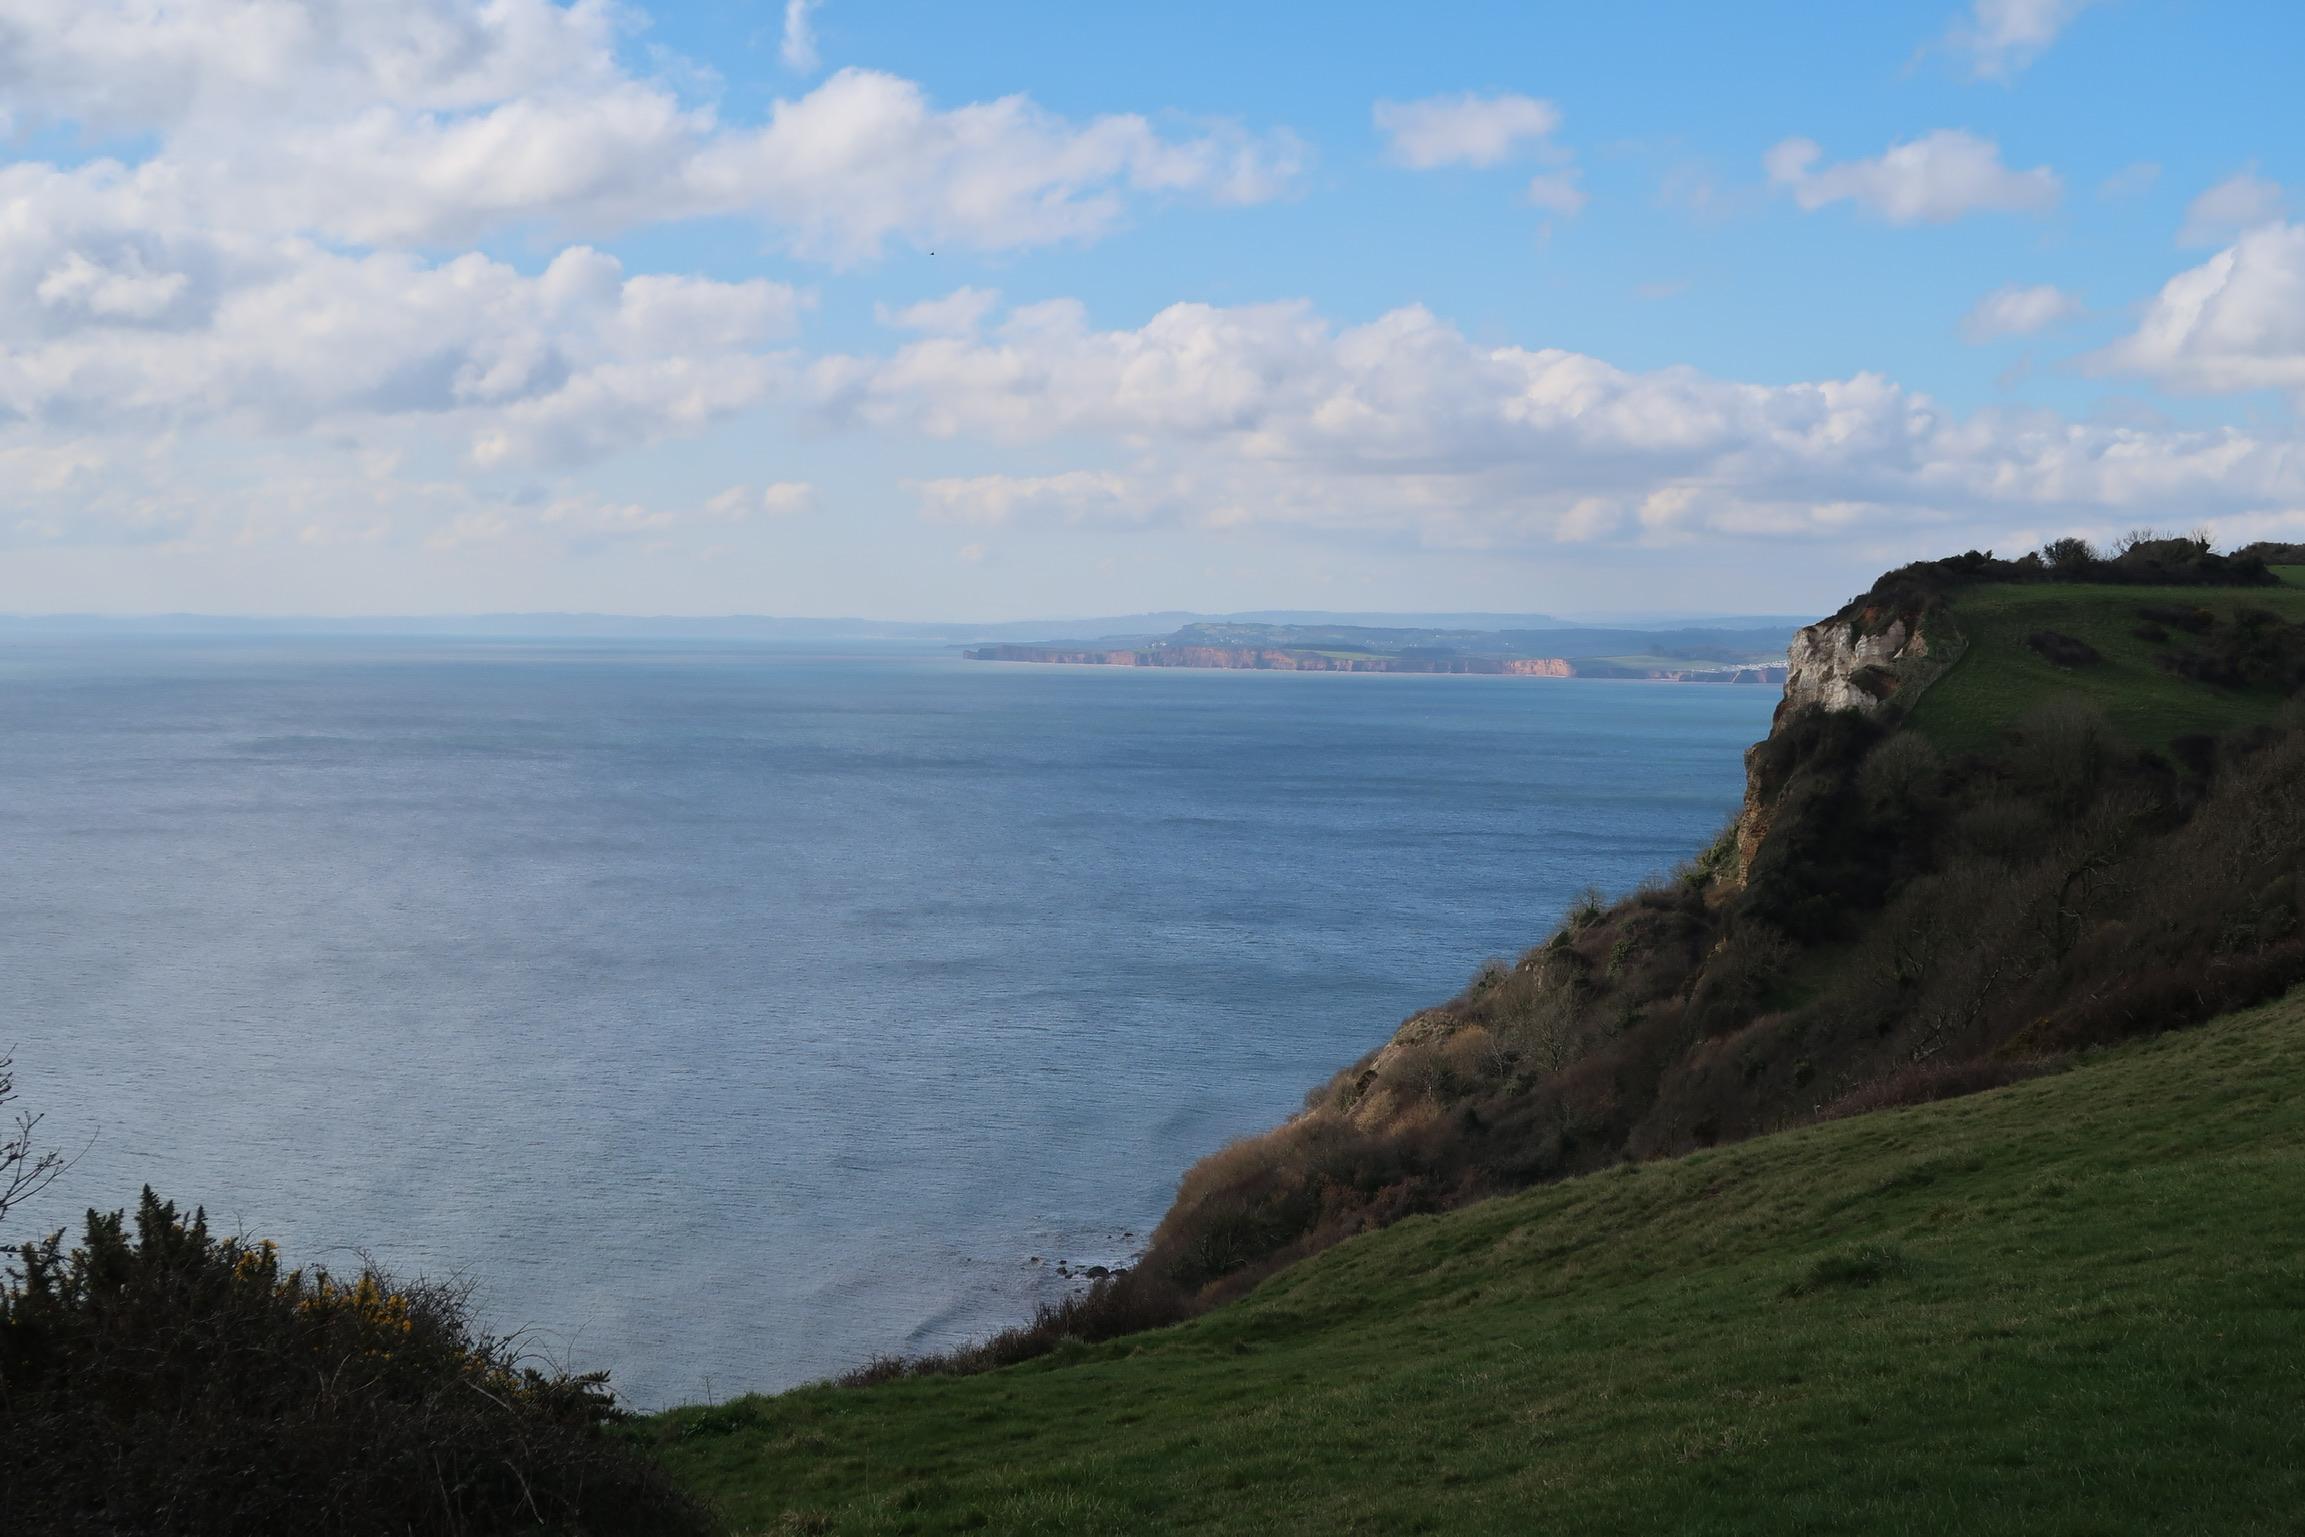 Shot from the top of Berry Cliffs looking over the sea towards Sidmouth